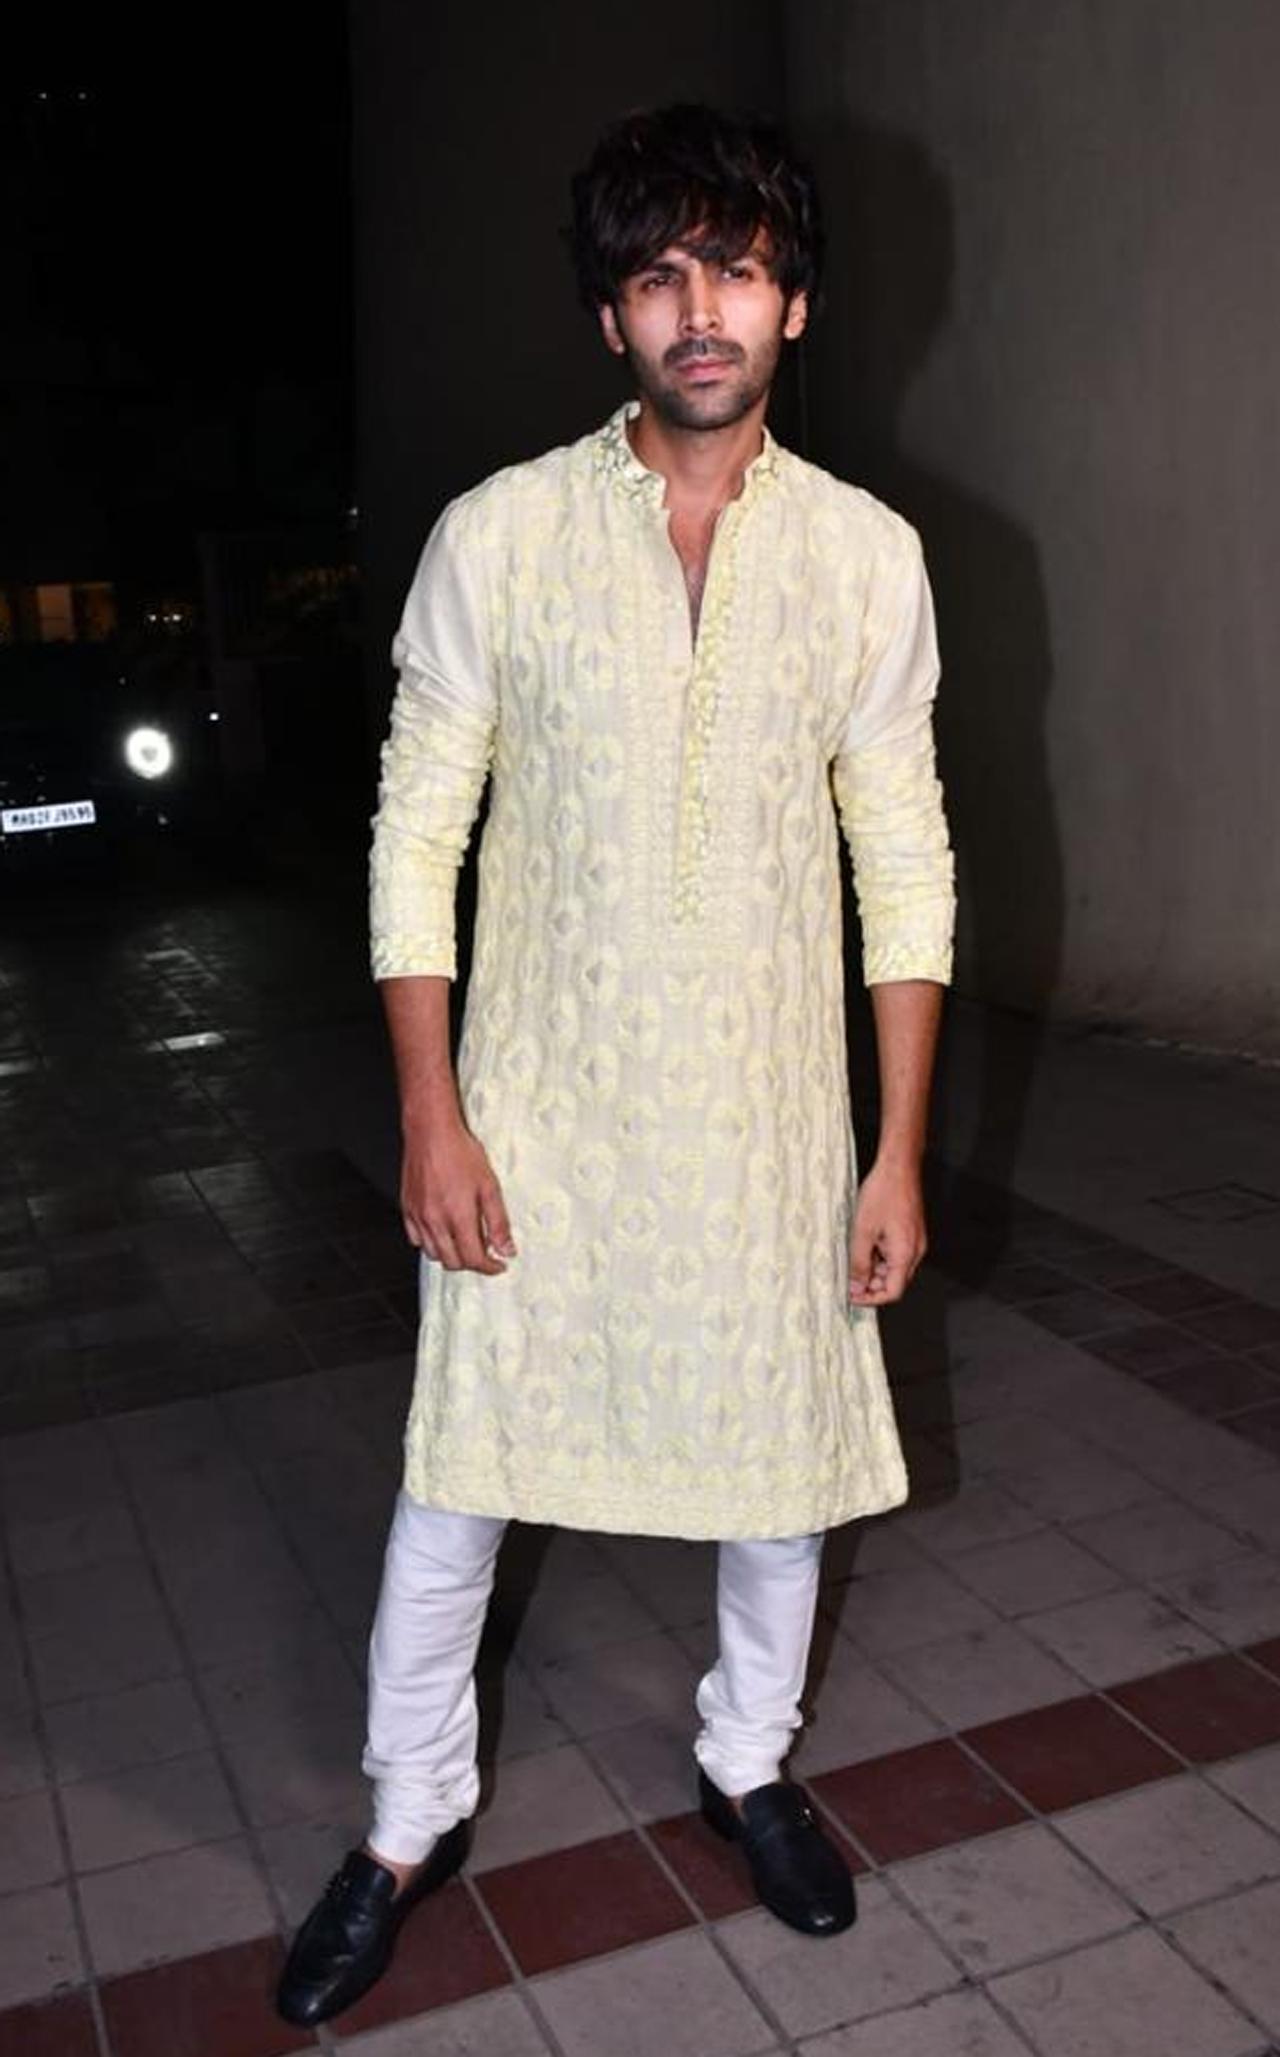 Kartik Aaryan aced his traditional outfit for the Eid bash hosted by Saqib Saleem and Huma Qureshi. Aaryan is gearing up for Anees Bazmee's 'Bhool Bhulaiyaa 2' that releases in cinemas on May 20. The actor was in Chandigarh recently for the promotions of his upcoming horror-comedy that also stars Tabu and Kiara Advani.